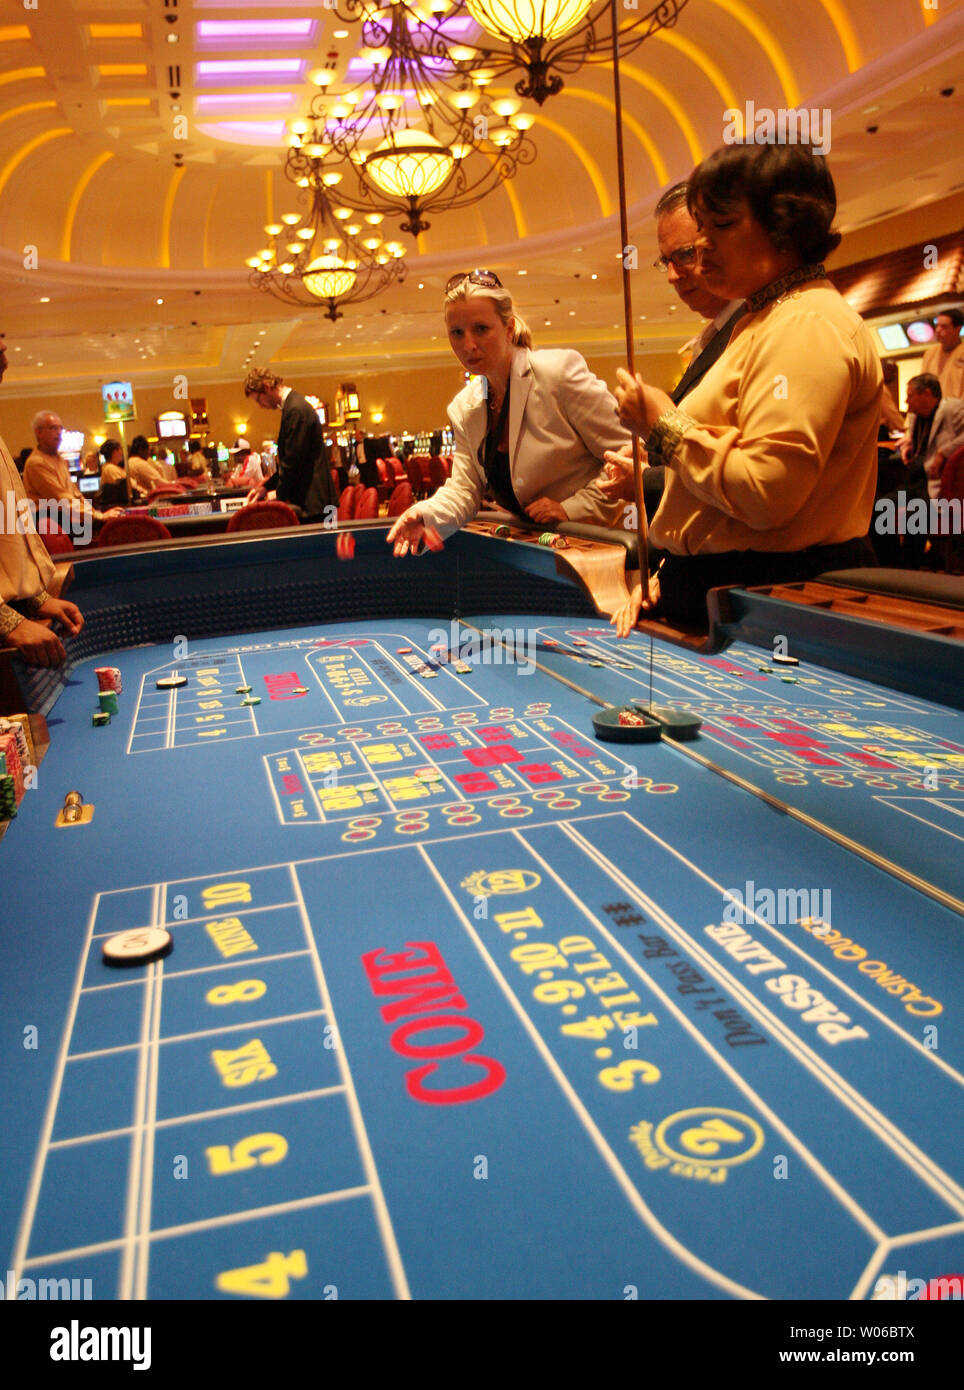 Gambler Kelly McMahon throws the dice on the craps table during the grand opening at the new Casino Queen Casino in East St. Louis, Illinois on August 2, 2007. The $92 million, 207,500-square-foot gaming facility, replaces the old riverboat casino and offers more than 1100 slot machines.  (UPI Photo/Bill Greenblatt) Stock Photo